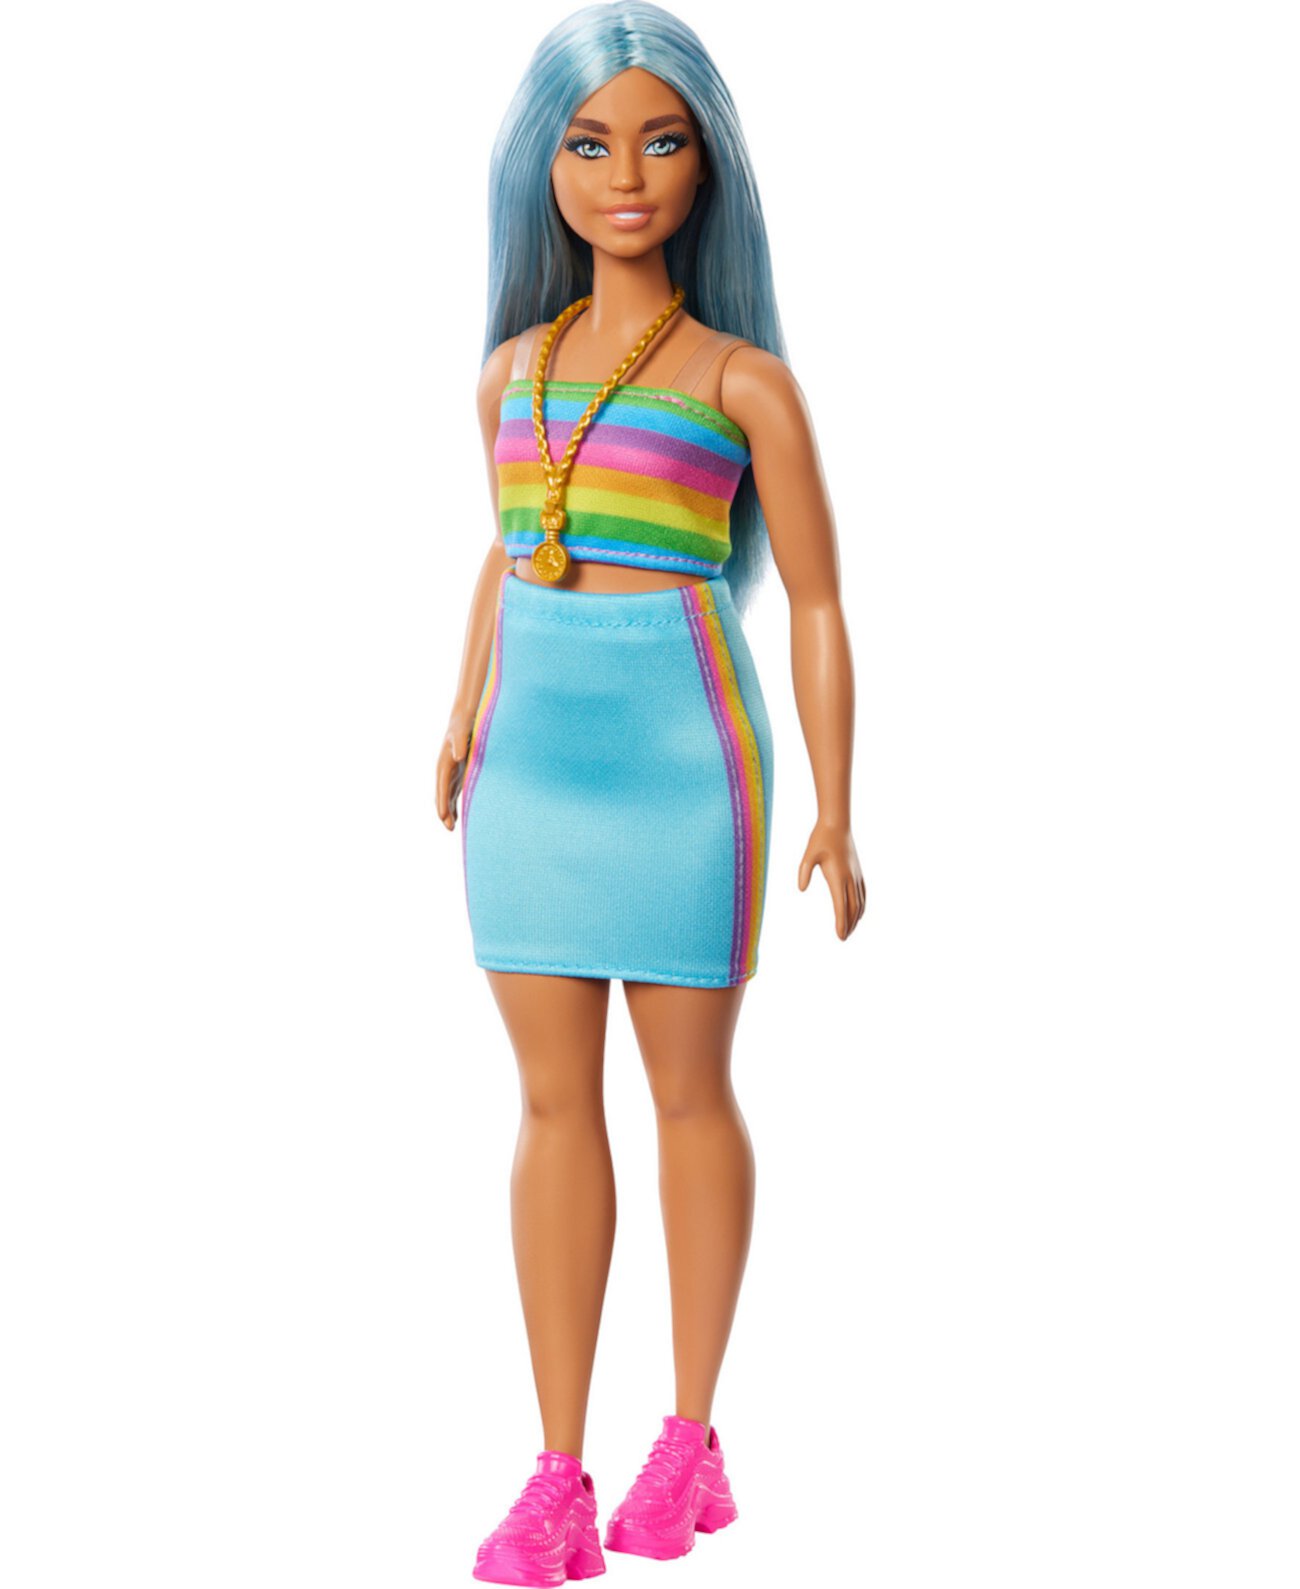 Fashionistas Doll 218 with Blue Hair, Rainbow Top and Teal Skirt, 65th Anniversary Barbie